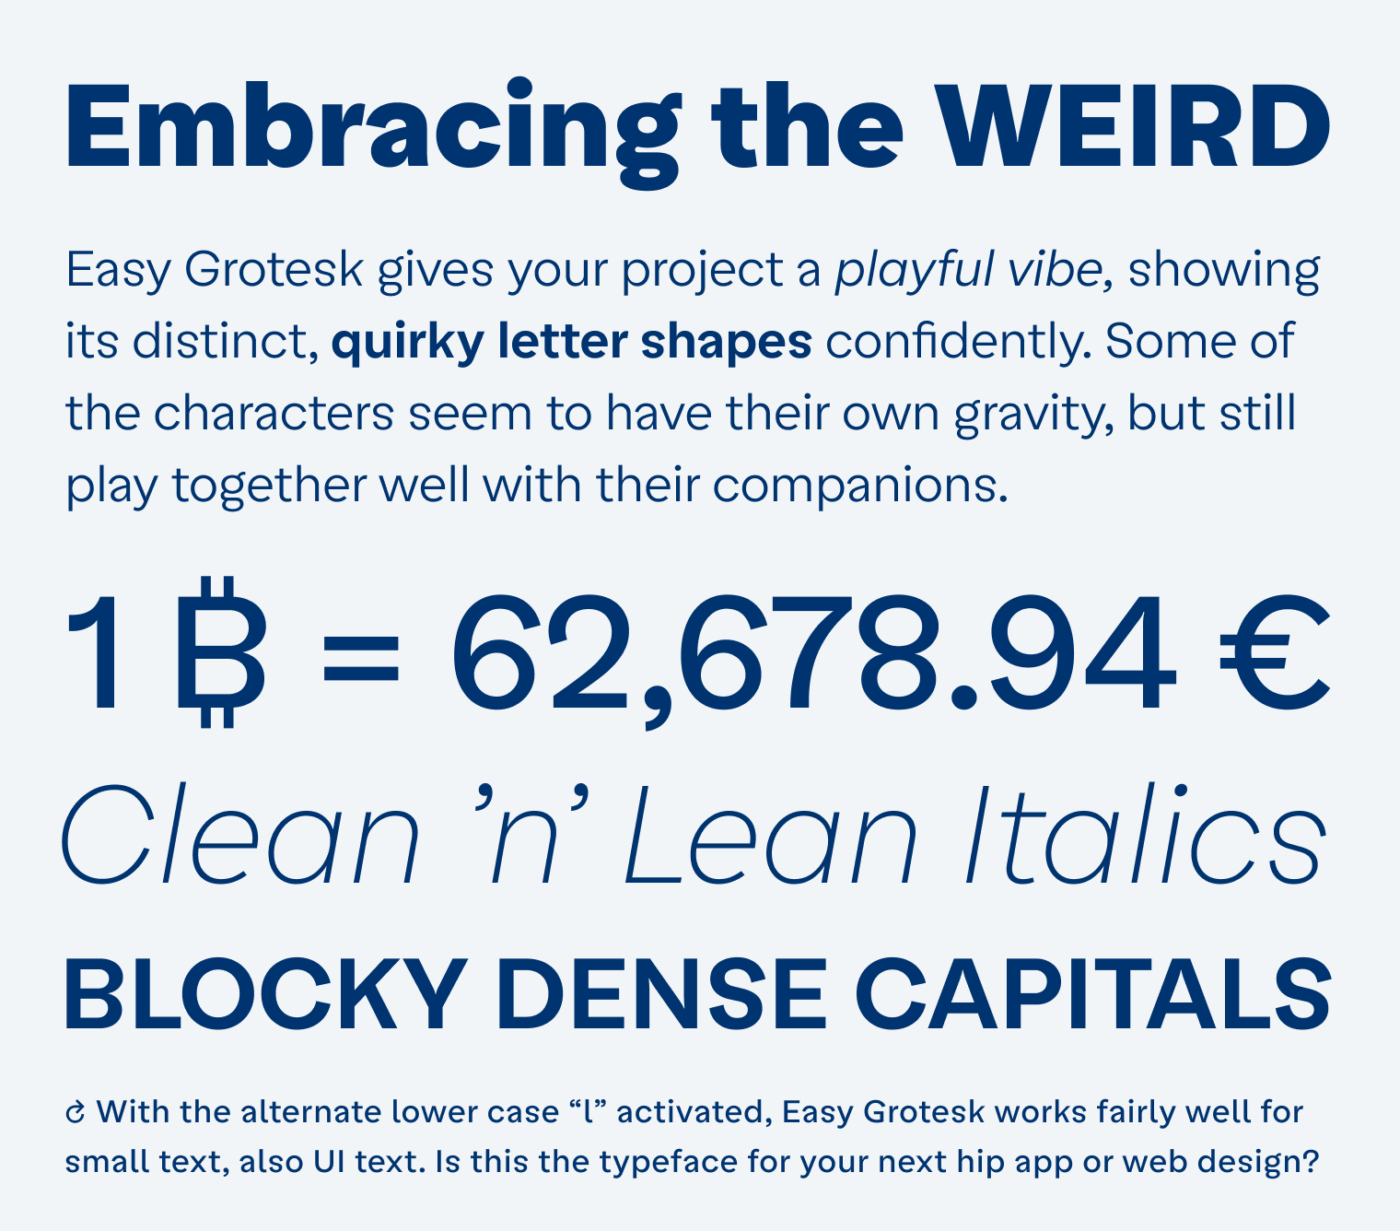 Embracing the weird. Easy Grotesk gives your project a playful vibe, showing its distinct, quirky letter shapes confidently. Some of the characters seem to have their own gravity, but still play together well with their companions. Clean ’n’ Lean Italics. Blocky dense capitals. With the alternate lower case “l” activated, Easy Grotesk works fairly well for small text, also UI text. Is this the typeface for your next hip app or web design?